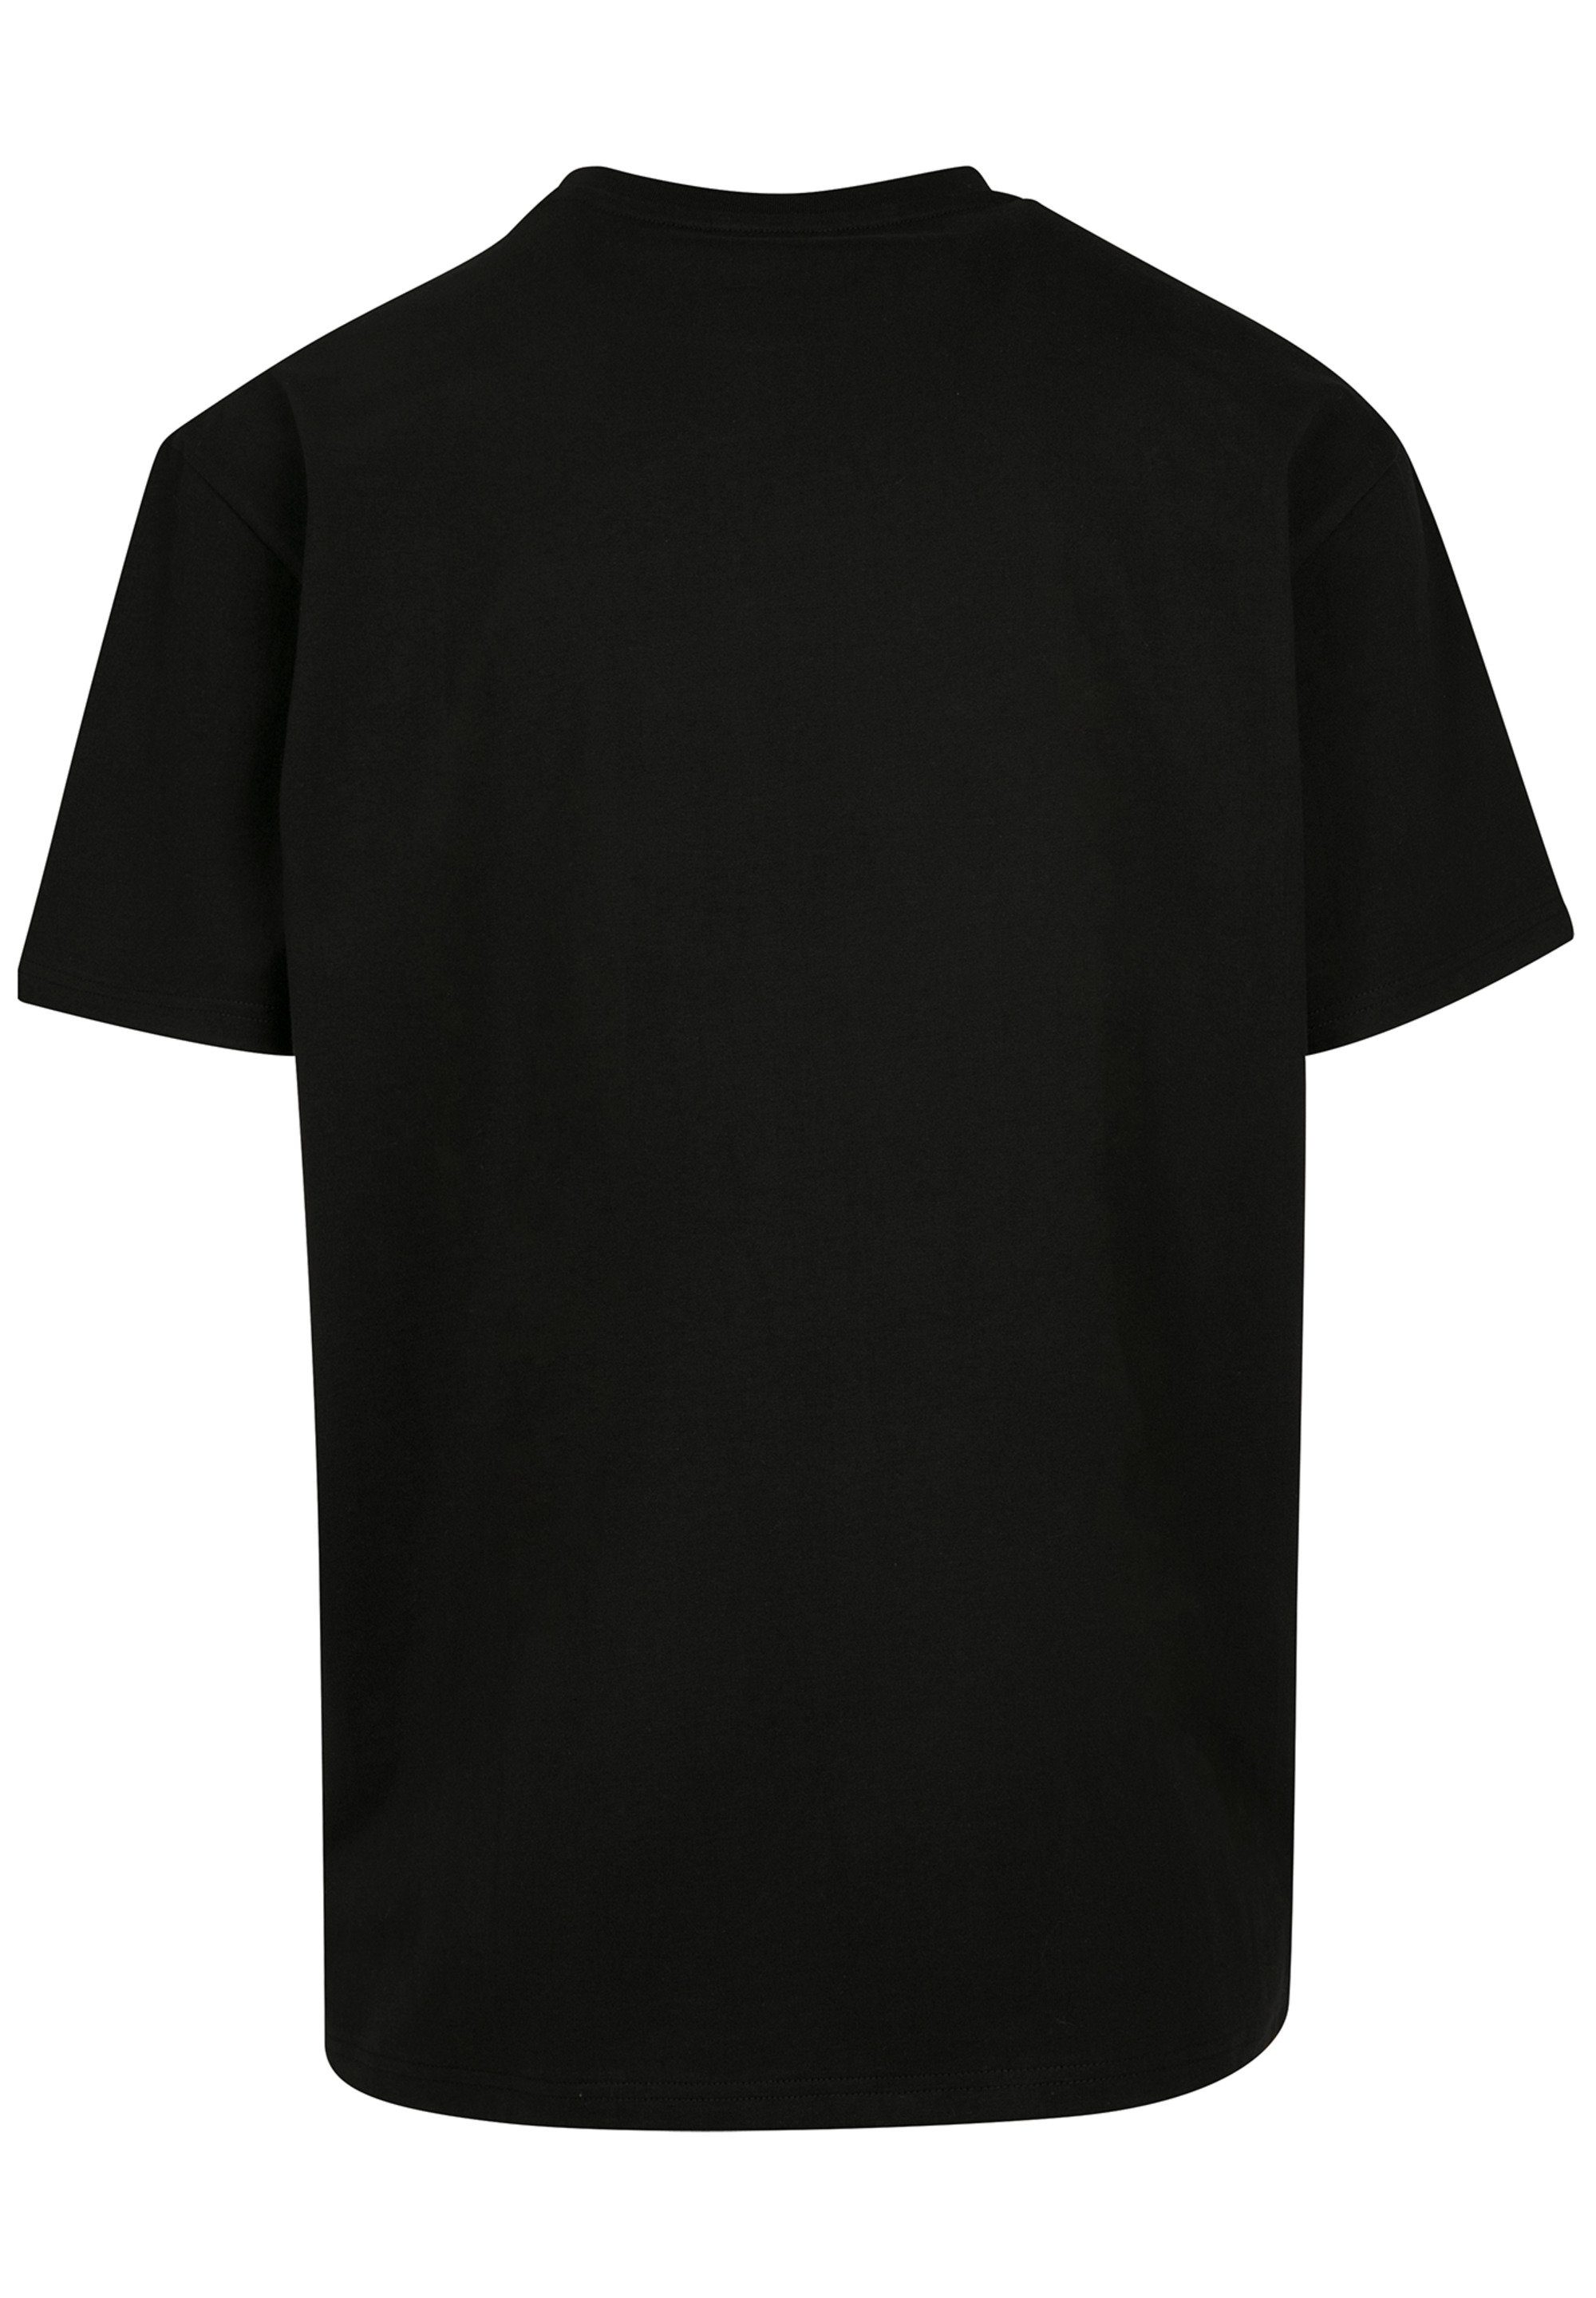 F4NT4STIC Herren black Despicable Heavy Duck Daffy with Oversize (1-tlg) -BLK Kurzarmshirt Tee